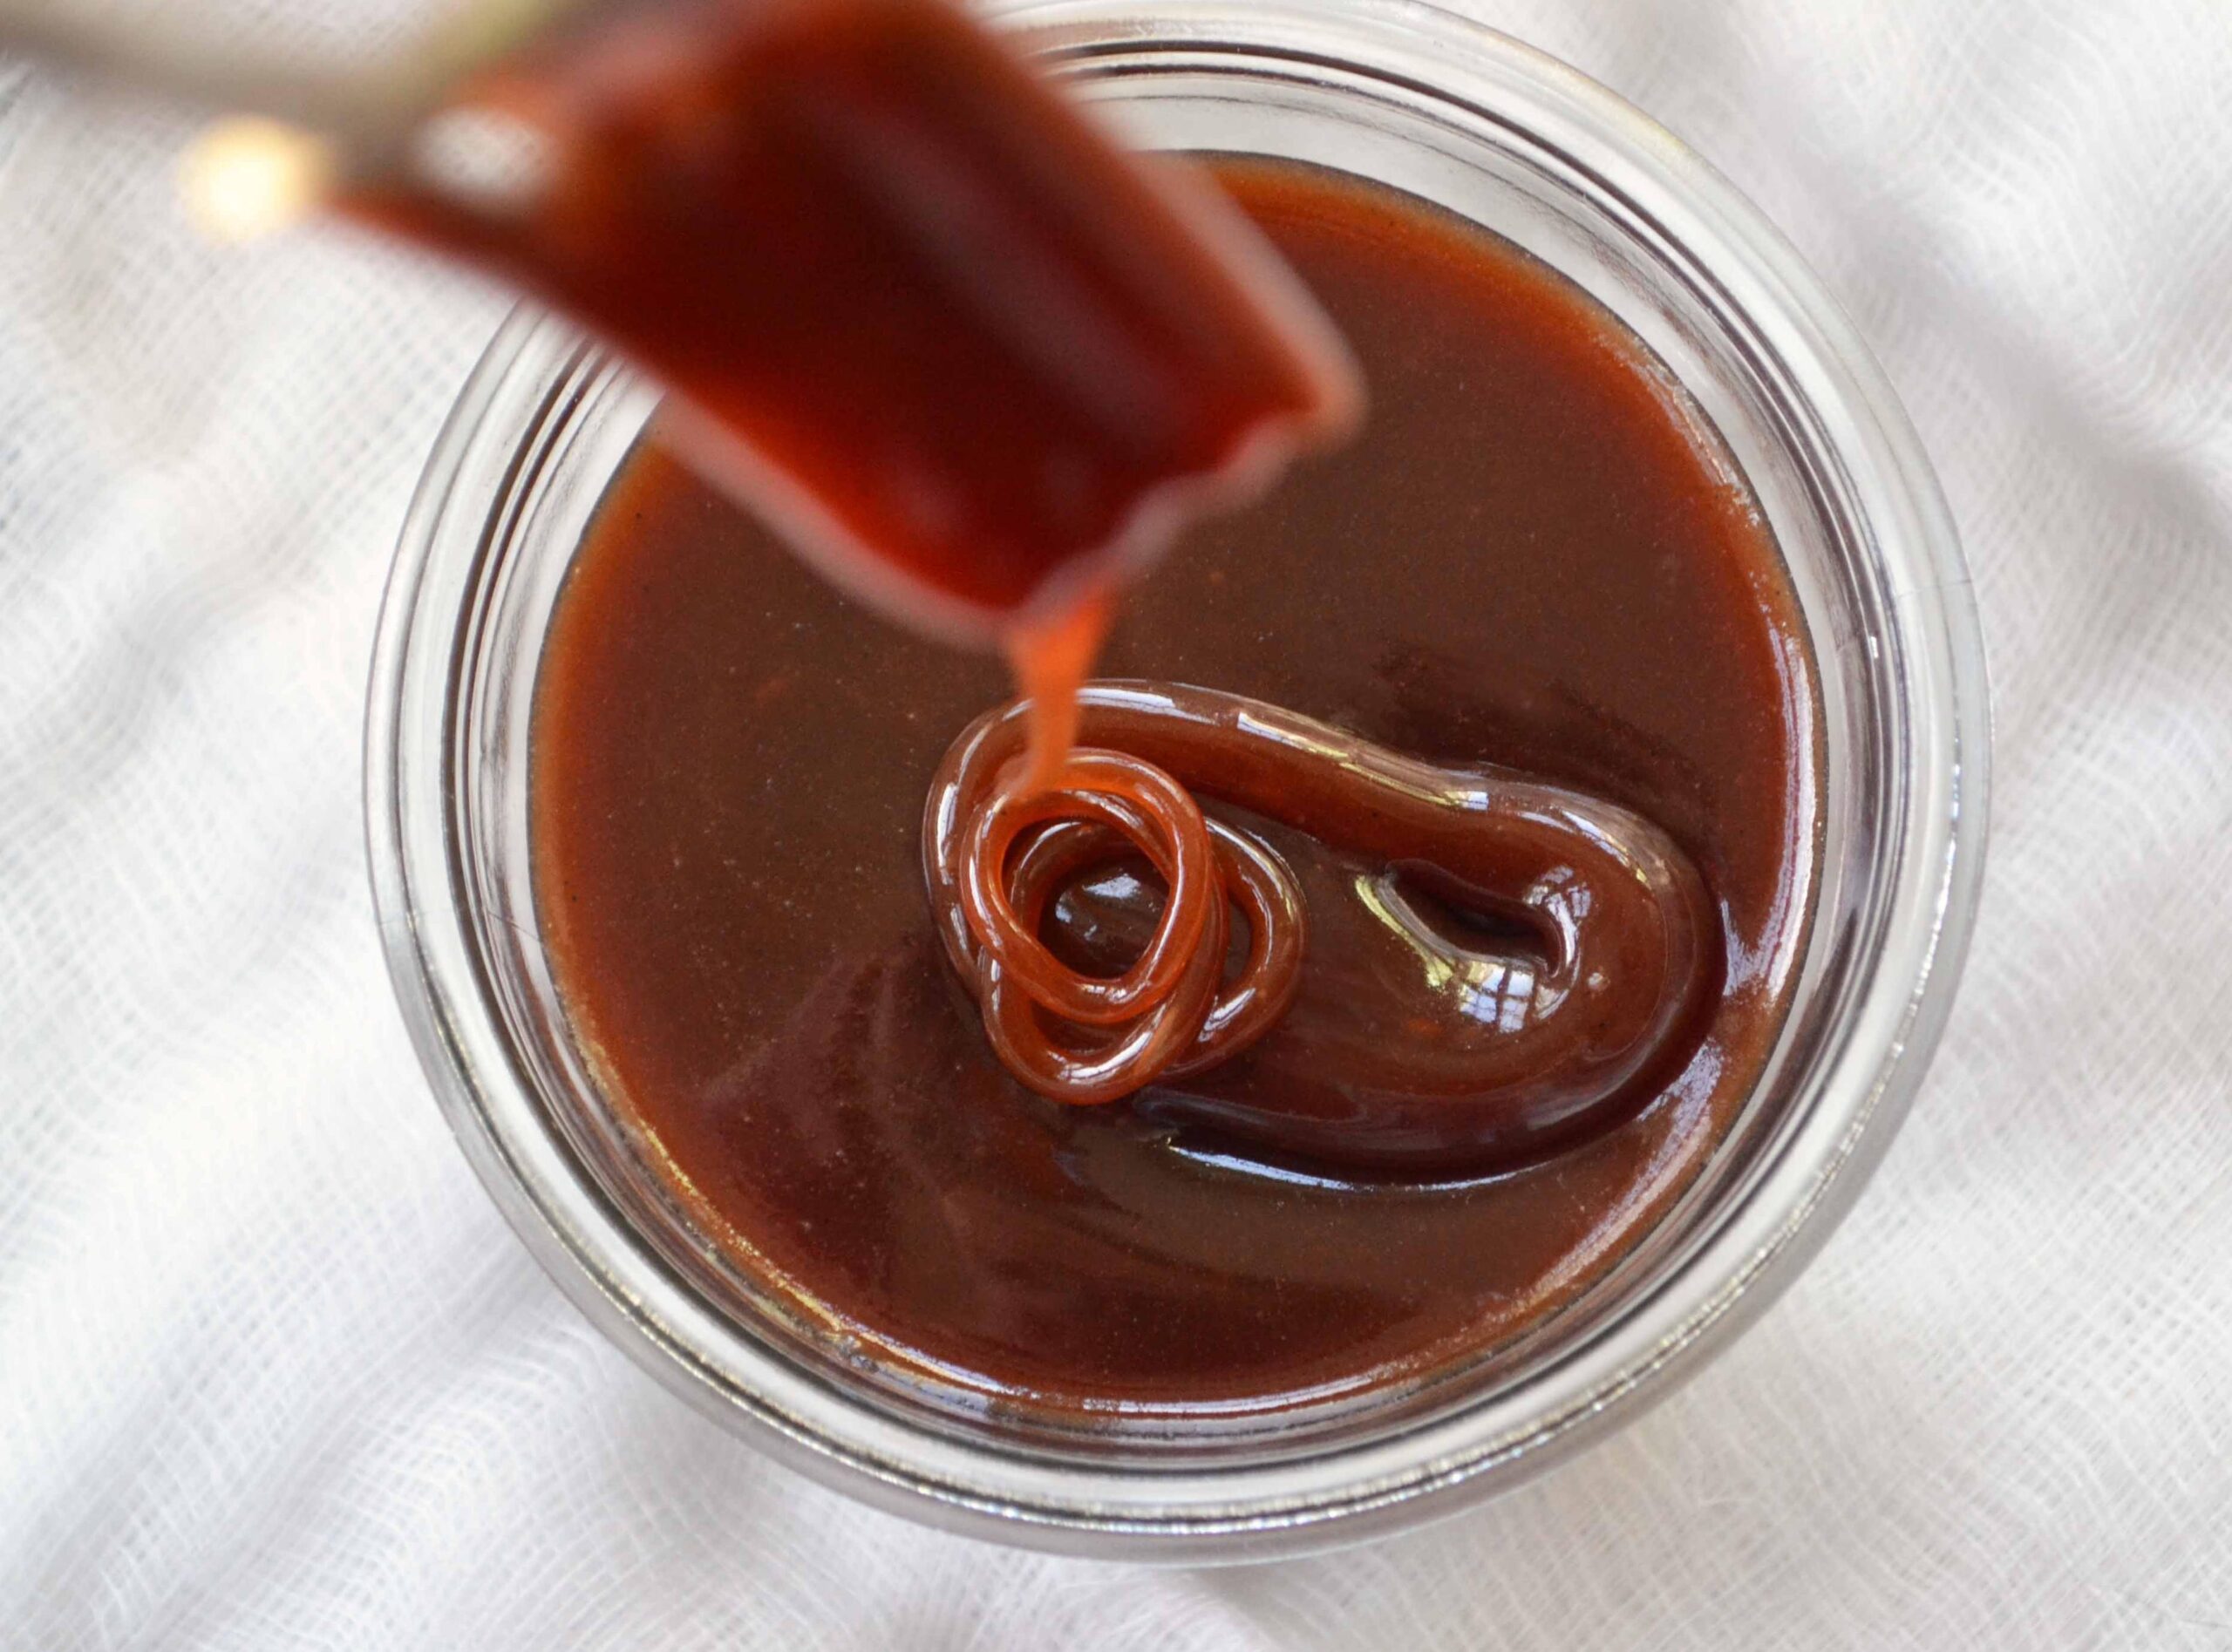  Give your morning coffee a vegan twist with this caramel sauce